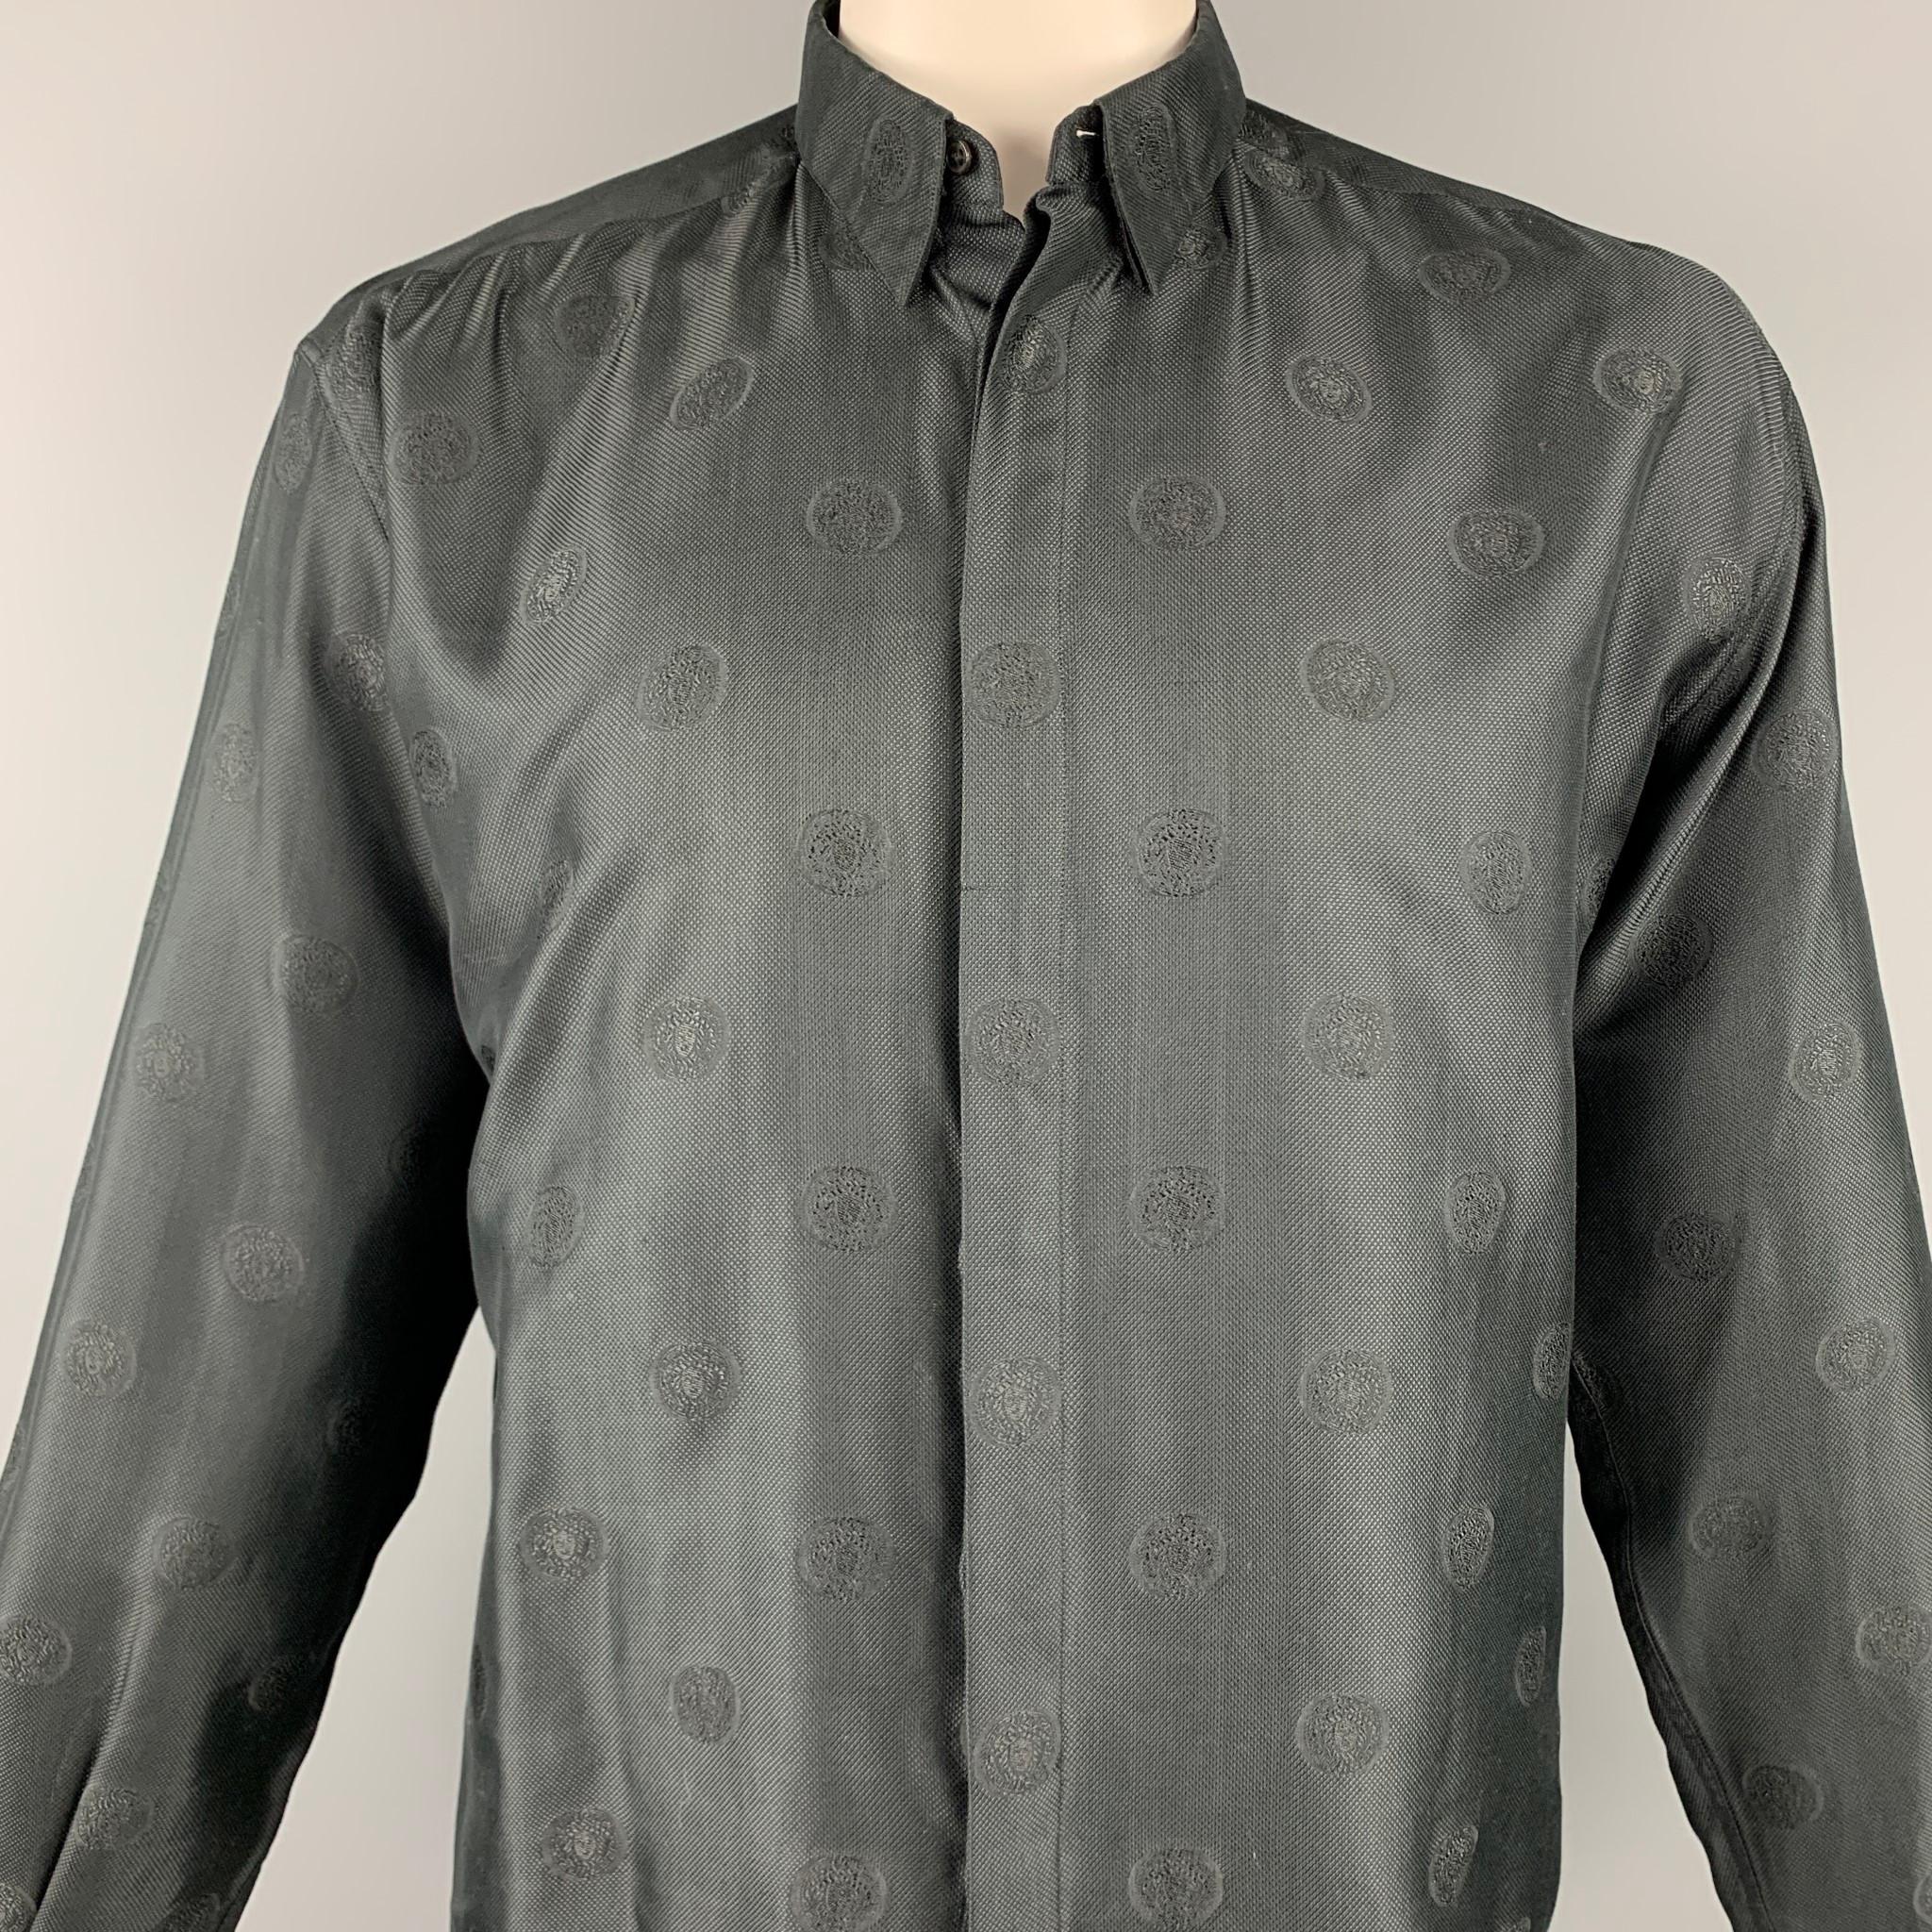 Vintage GIANNI VERSACE long sleeve shirt comes in a black cotton blend with a medusa head print throughout featuring a button down style and a hidden button closure. Made in Italy.

Very Good Pre-Owned Condition.
Marked: 50

Measurements:

Shoulder: